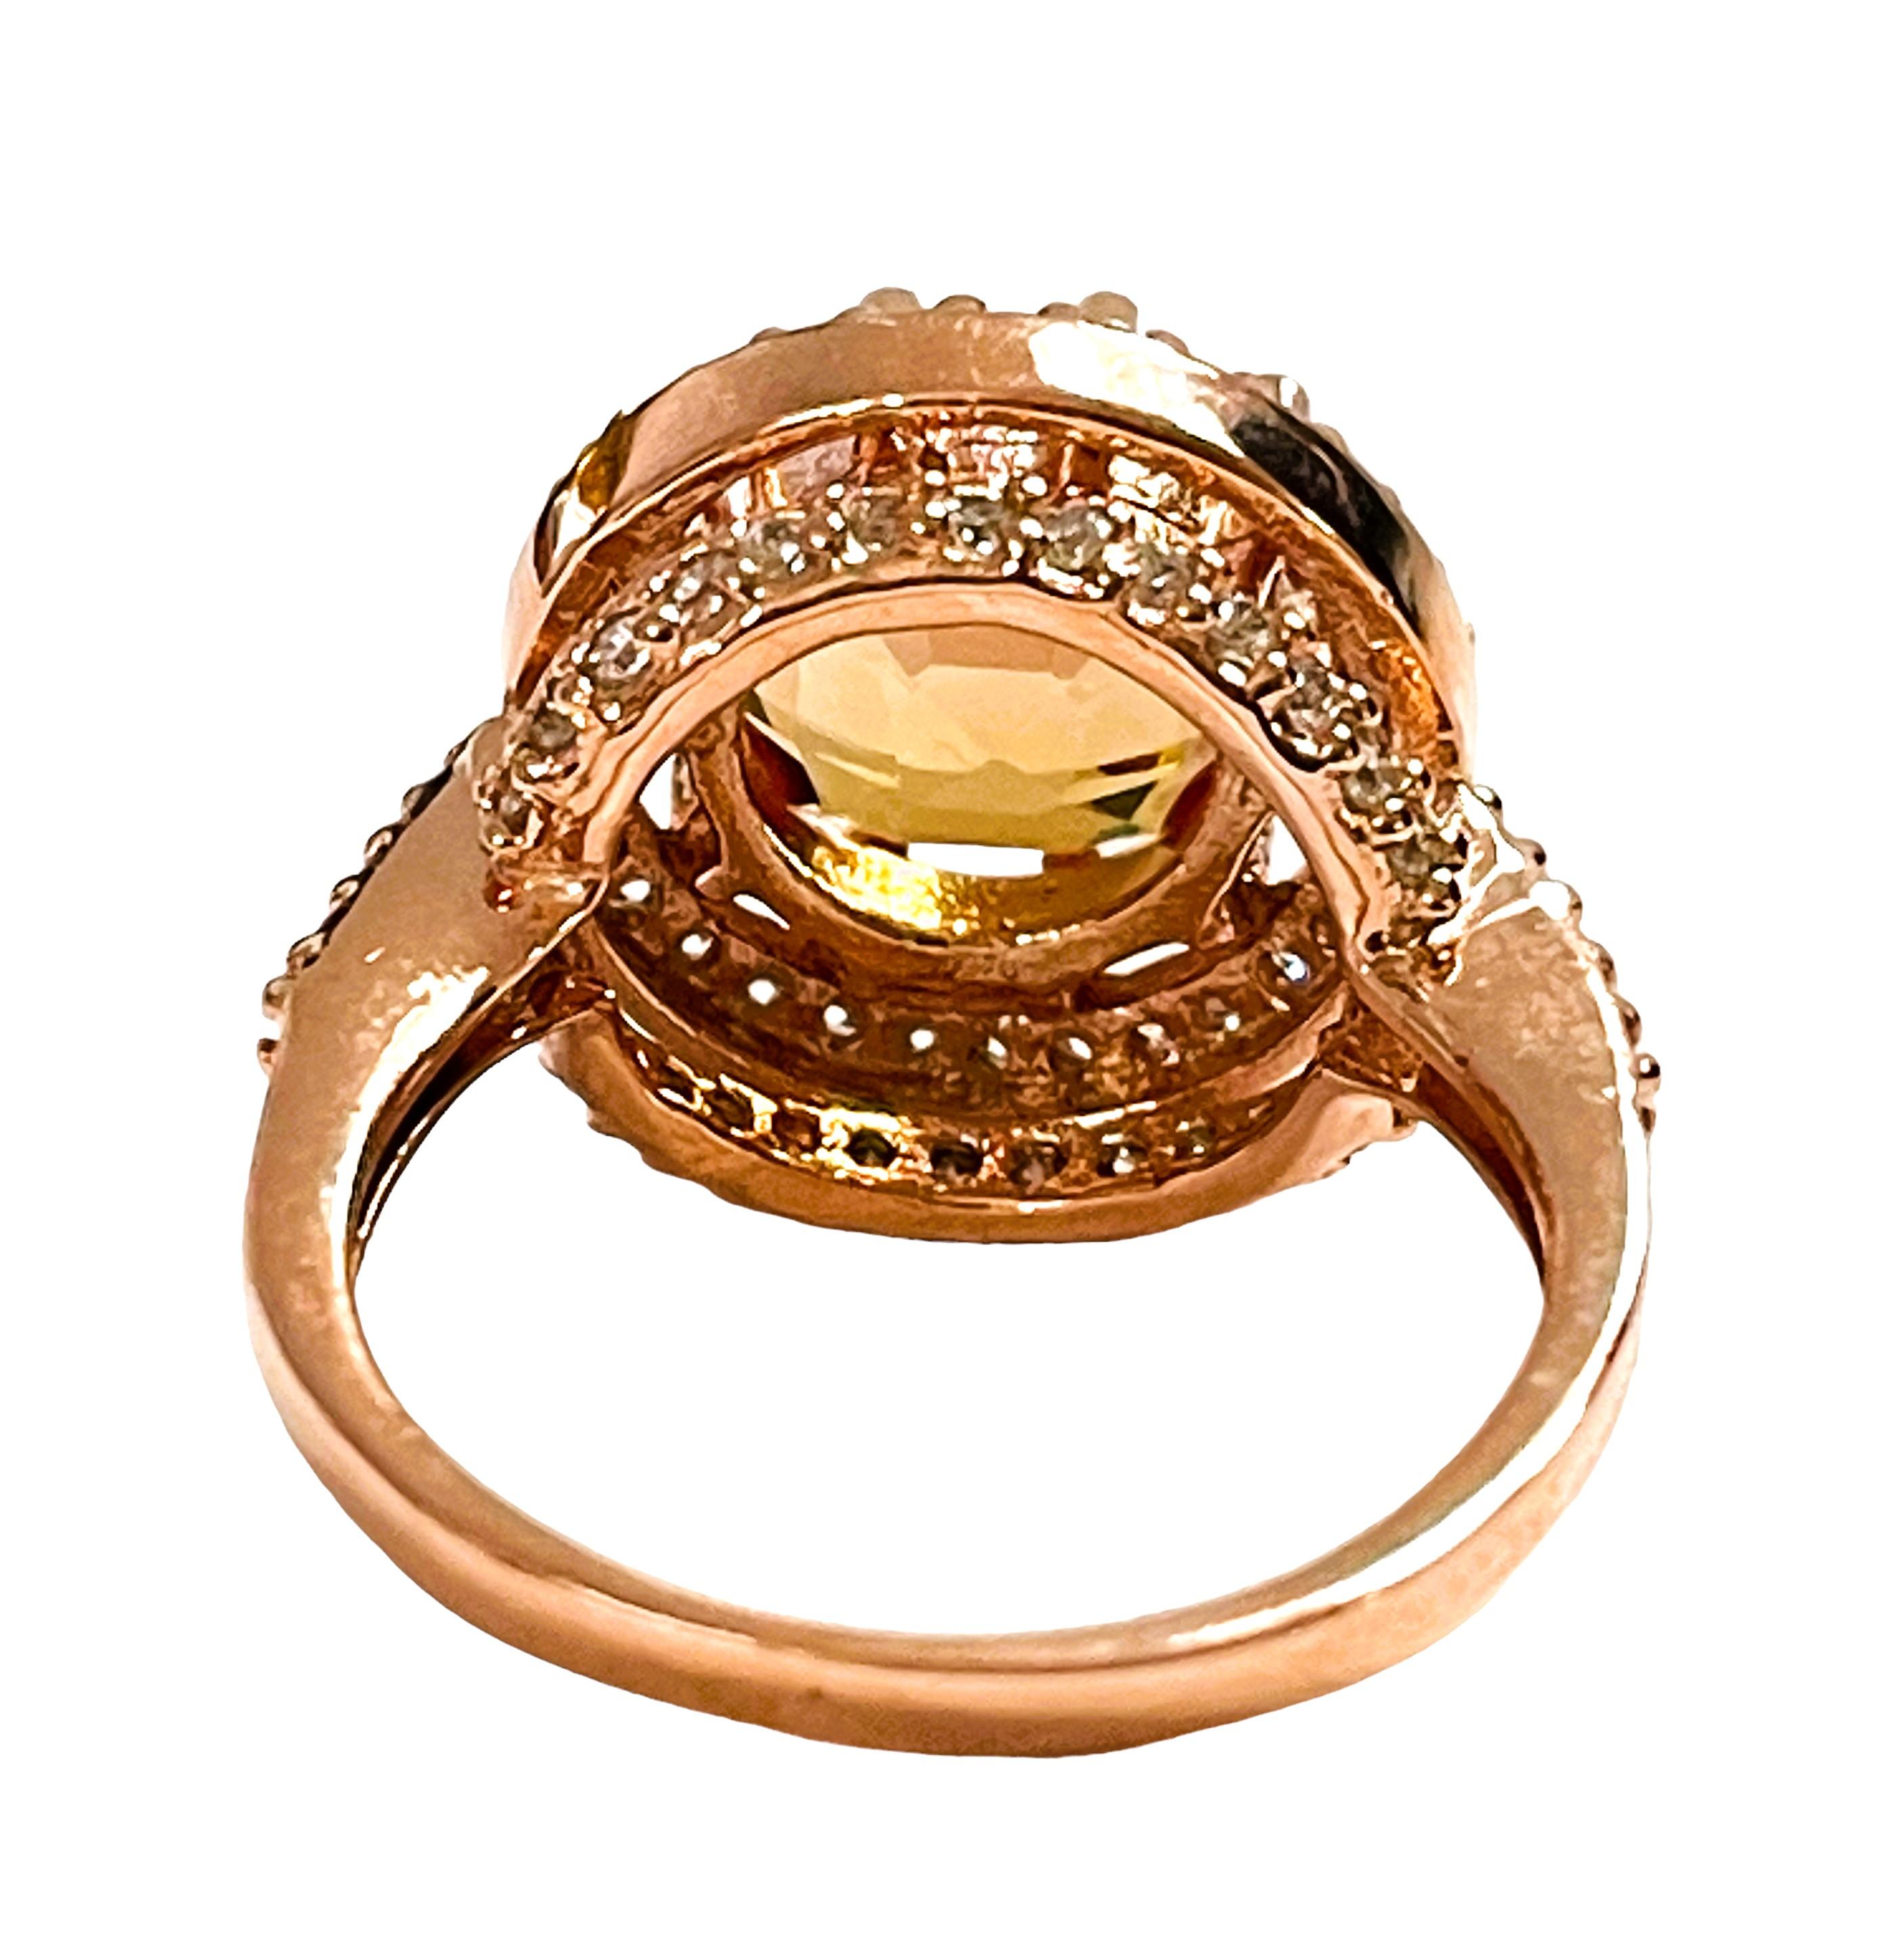 Round Cut New Nigerian If 6.1Ct Champagne Morganite & Sapphire Rgold Plated Sterling Ring